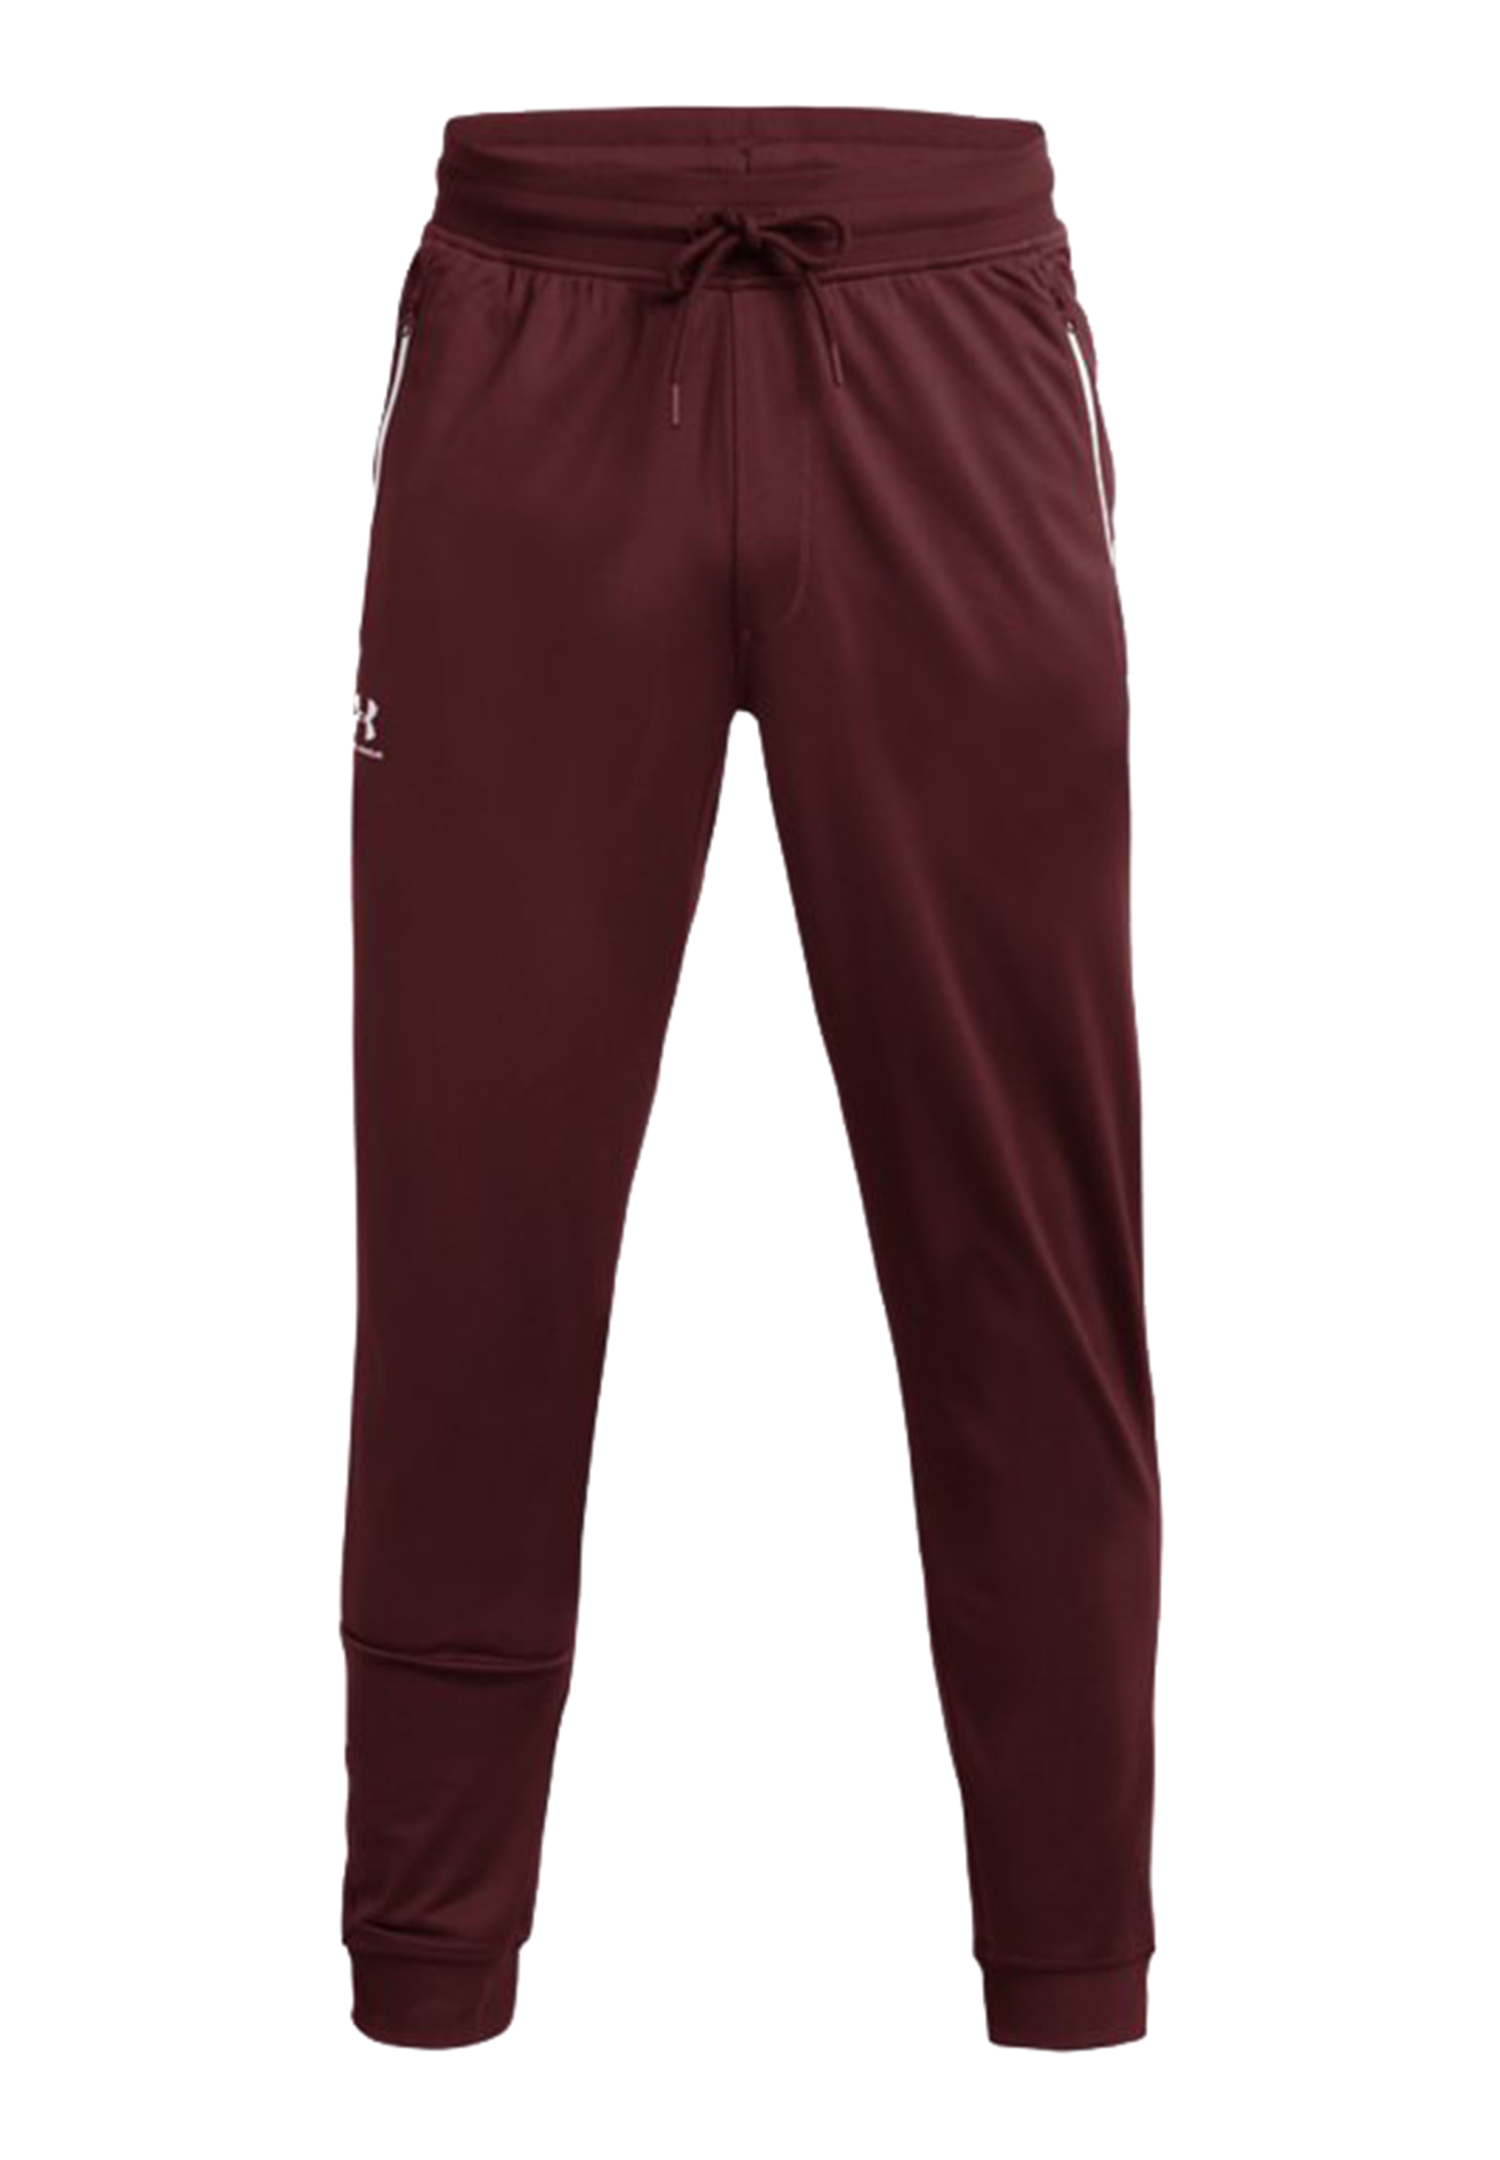 Under Armour Sportstyle Tricot Jogger Herren Fitness Hose Sporthose rot